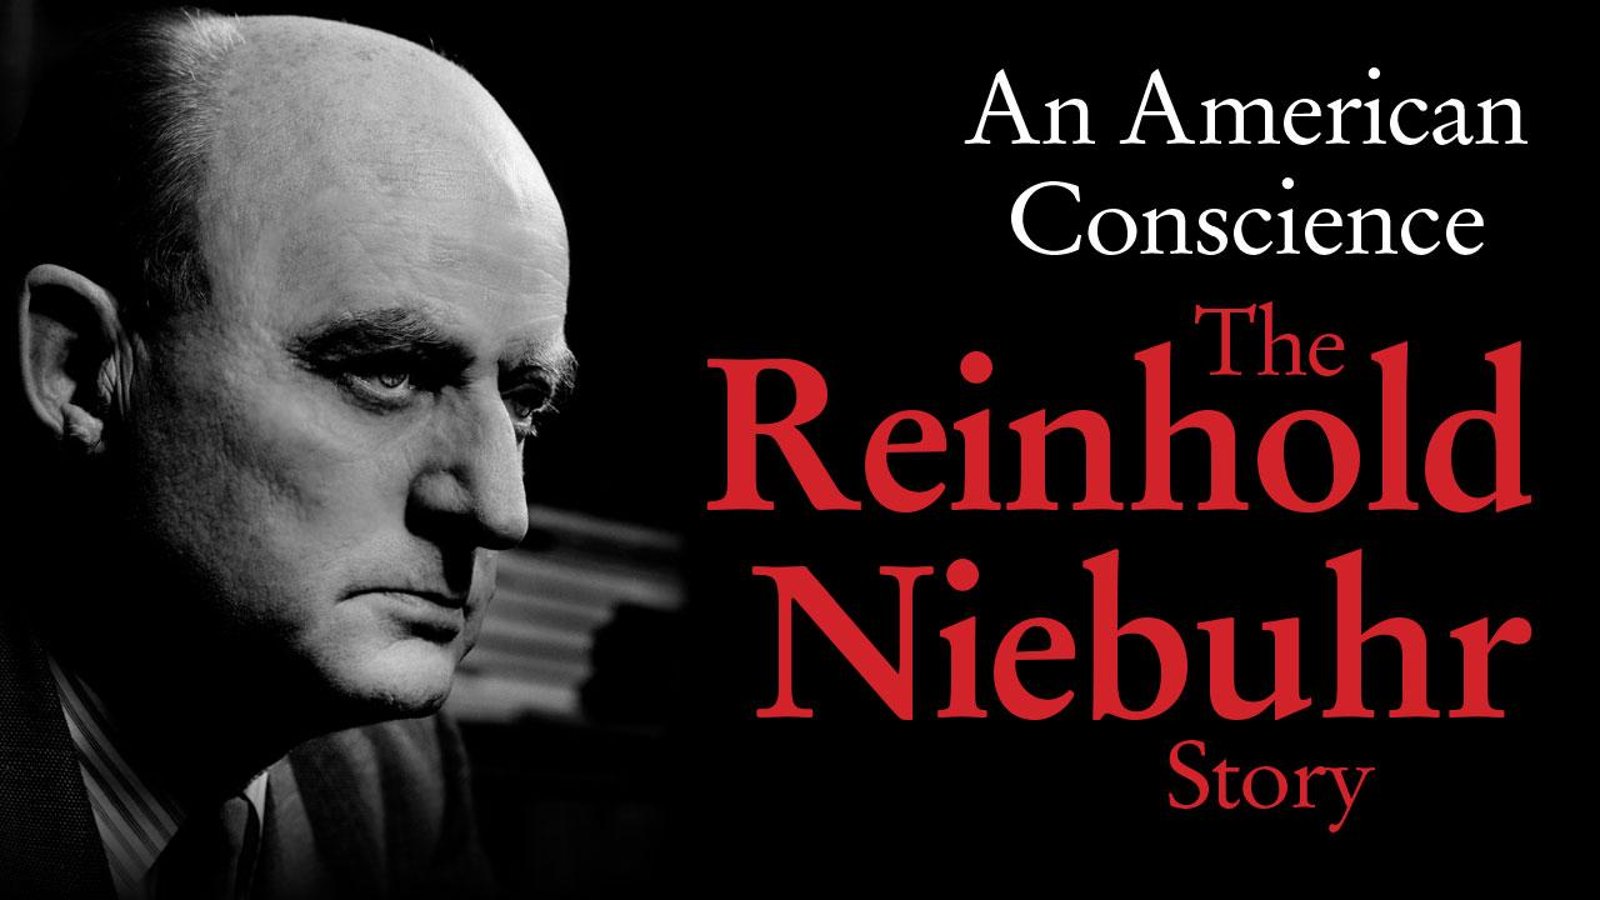 American Conscience: The Reinhold Niebuhr Story - The Life of An American Theologian